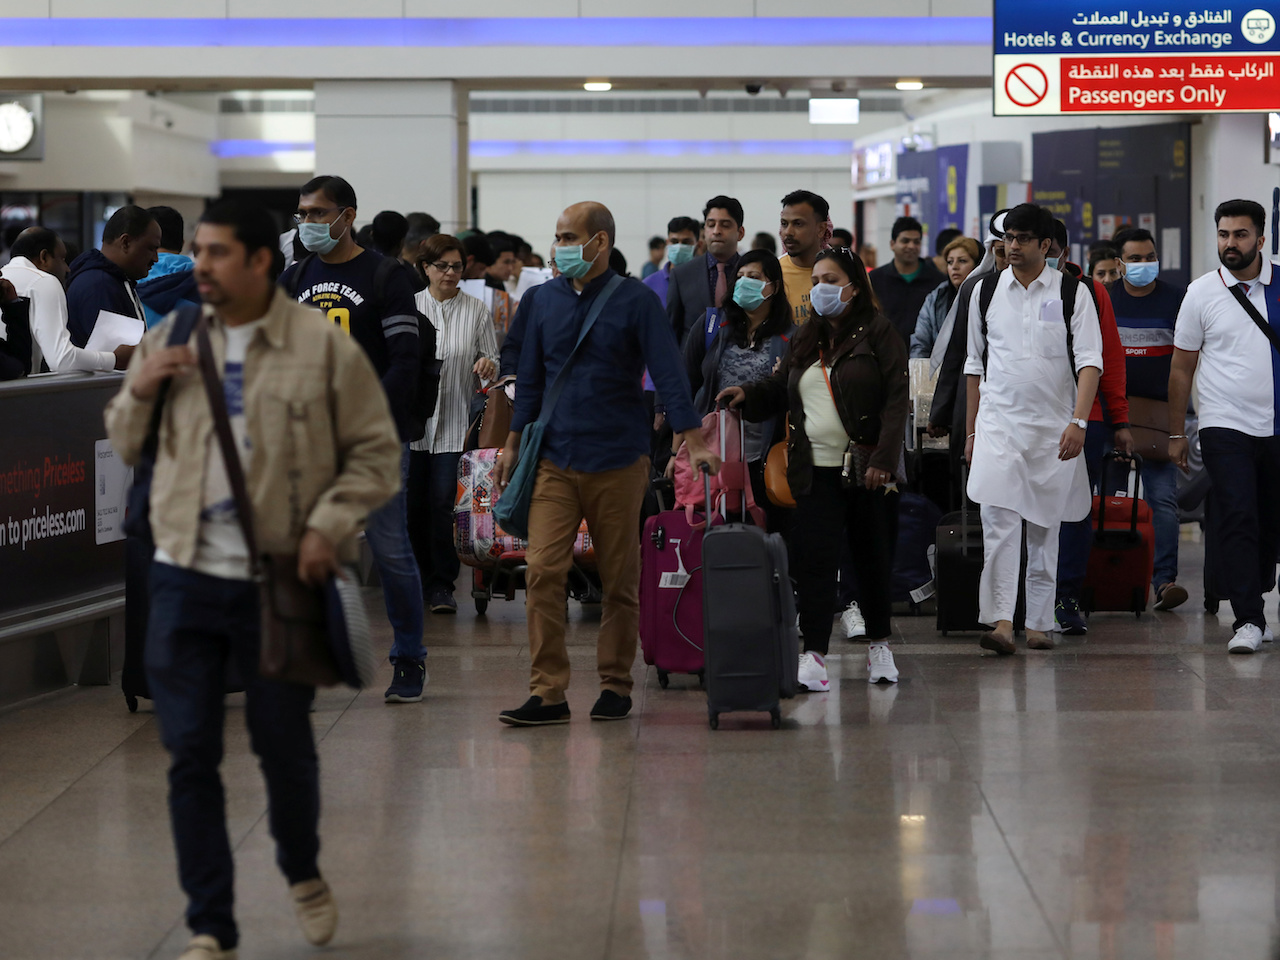 Travellers wear masks as they arrivw at the Dubai International Airport, after the UAE's Ministry of Health and Community Prevention confirmed the country's first case of coronavirus, in Dubai